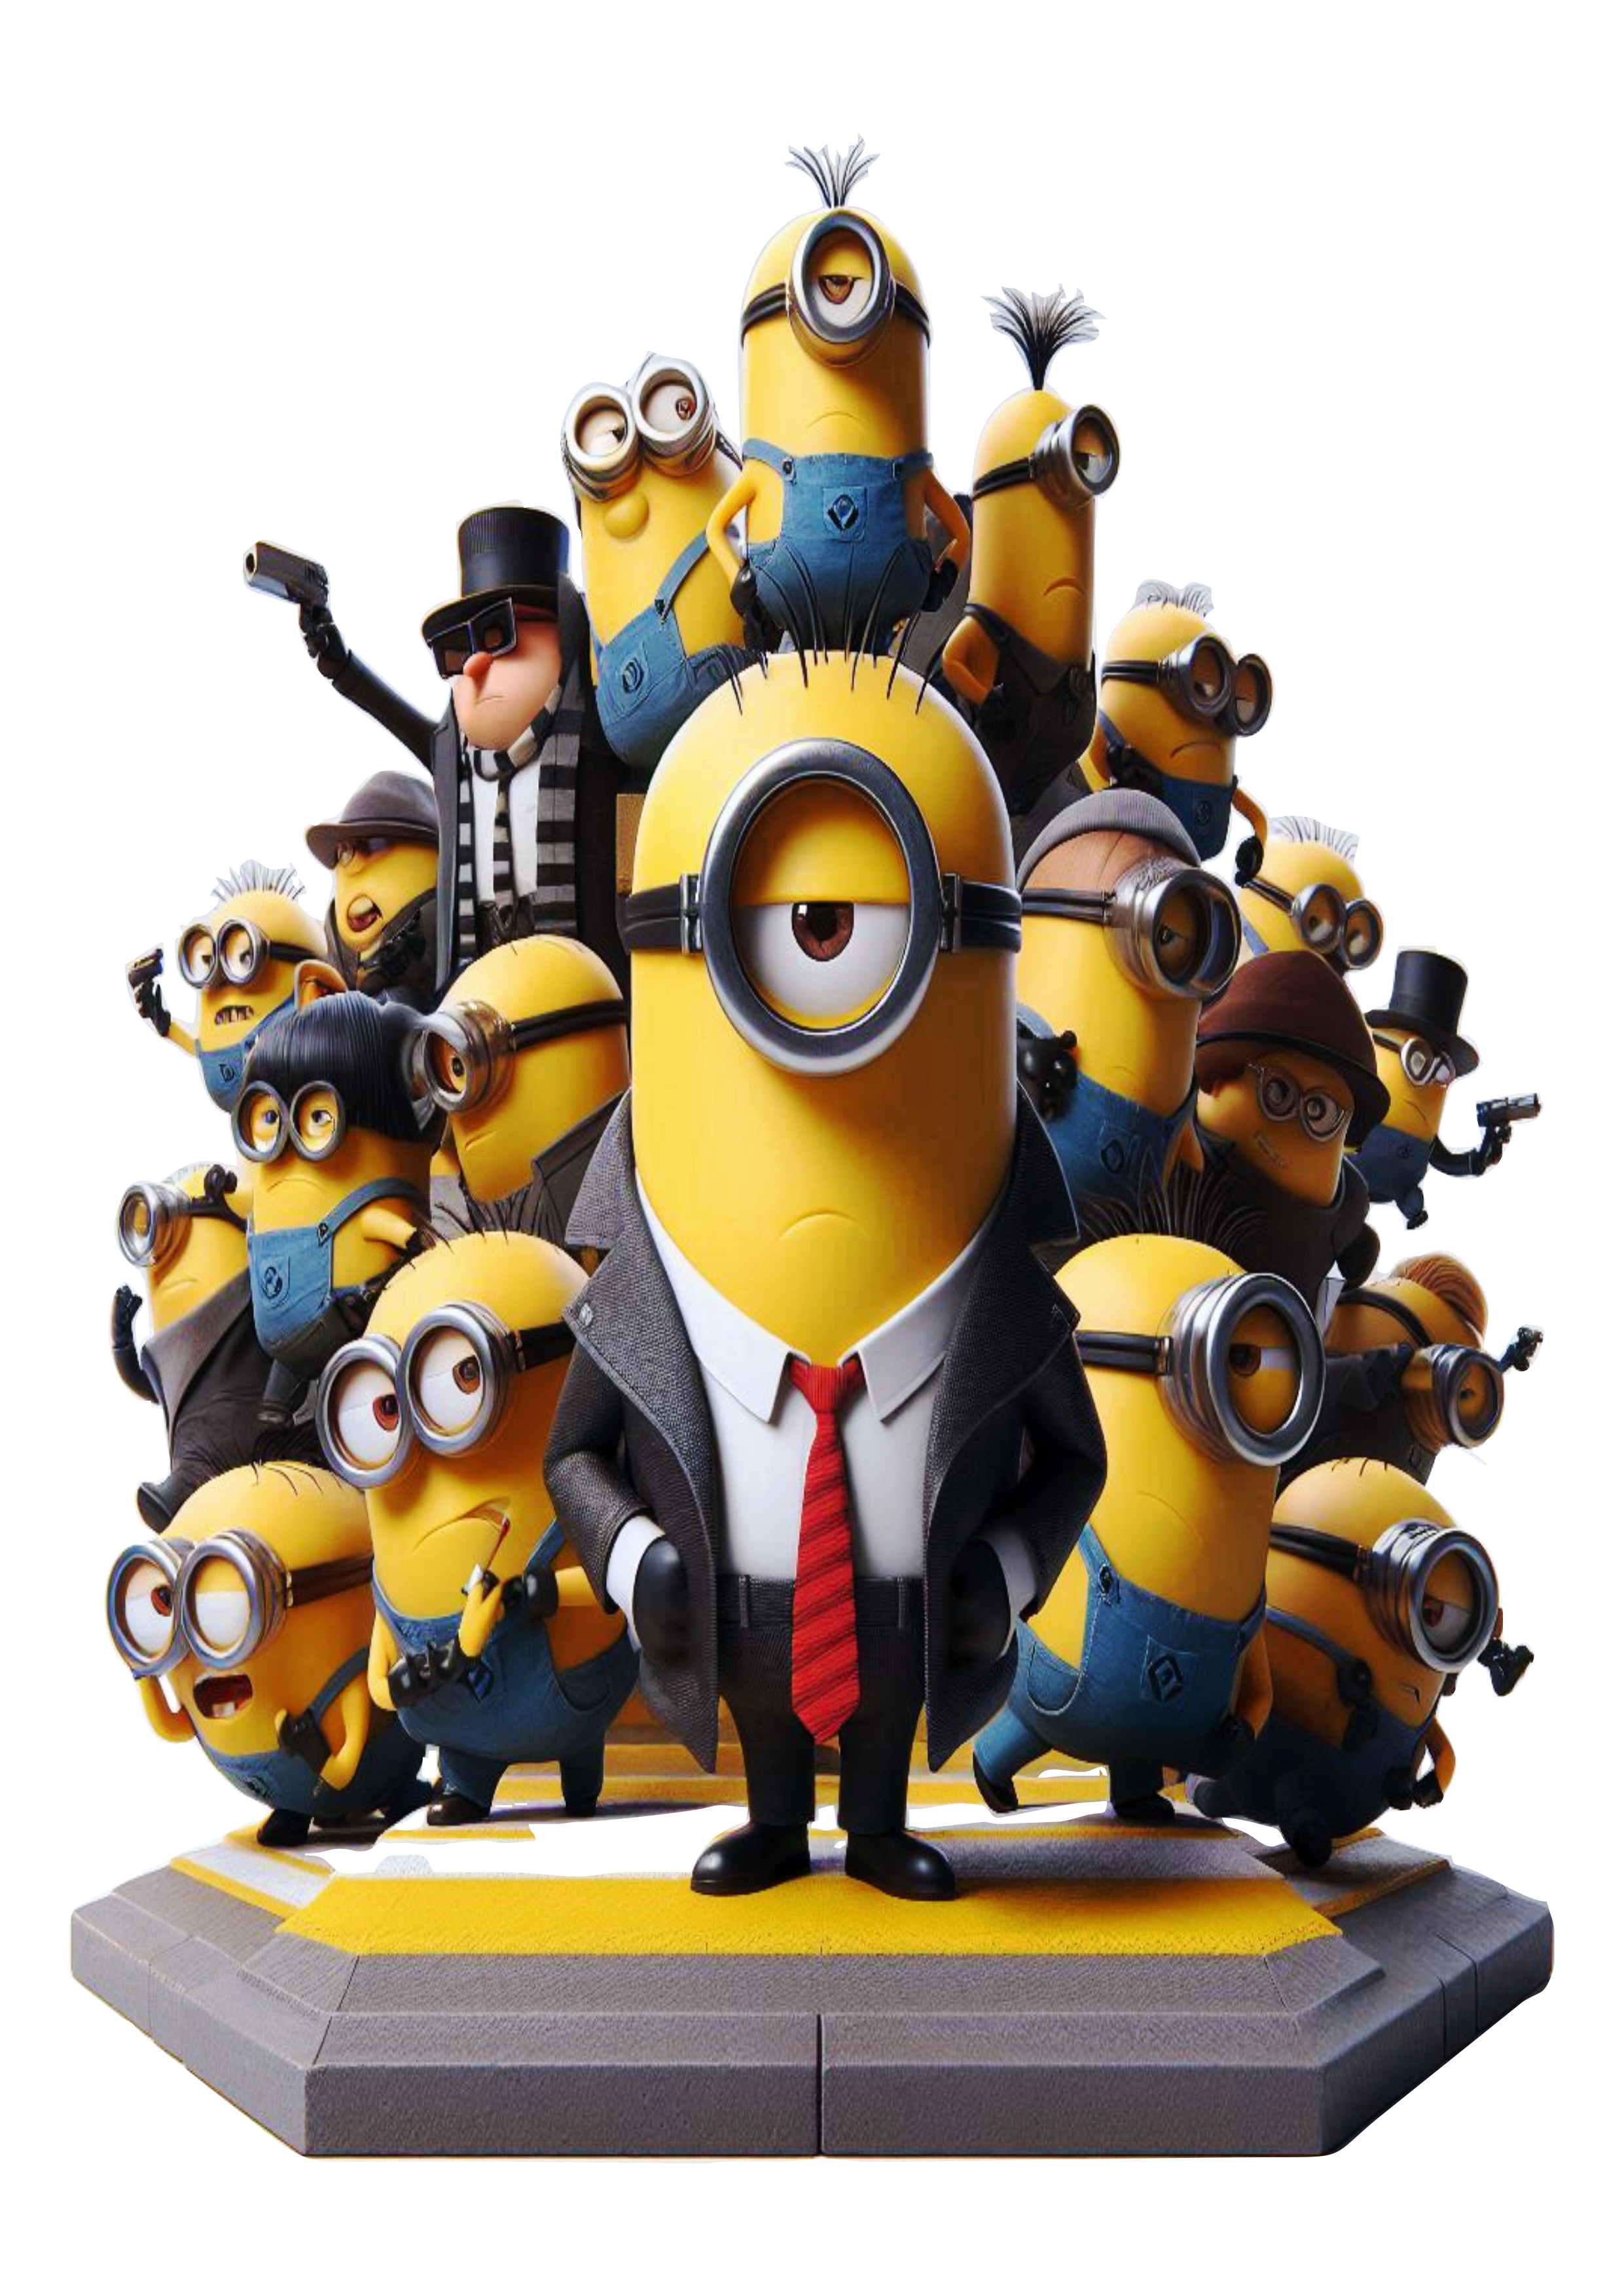 Minions png